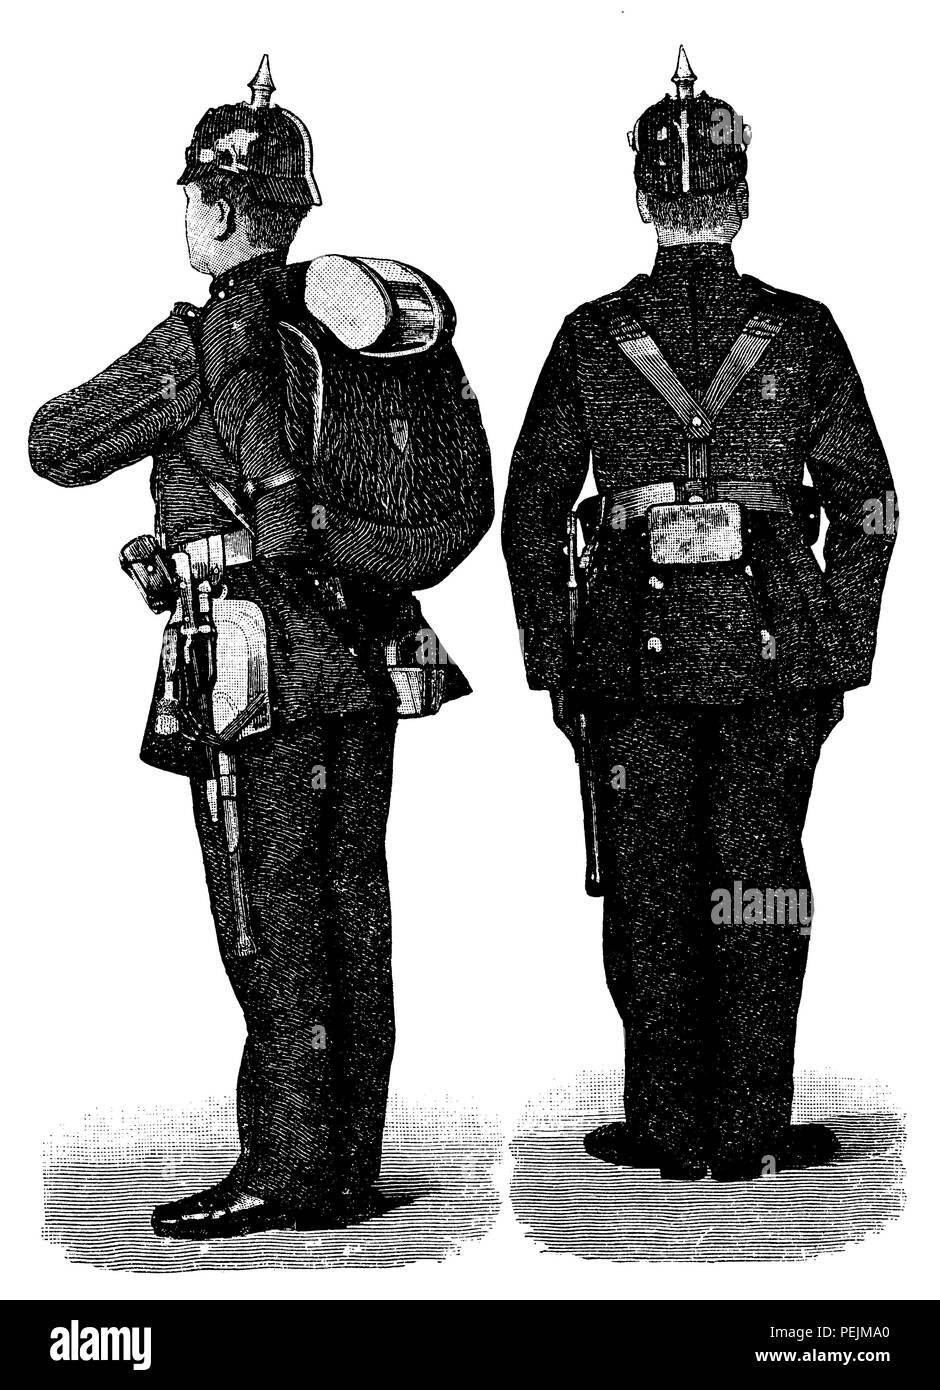 Infantryman with the new baggage from 1887 (complete equipment, left) and with the new luggage from 1887 (without backpack, but with cartridge pockets, right), Stock Photo